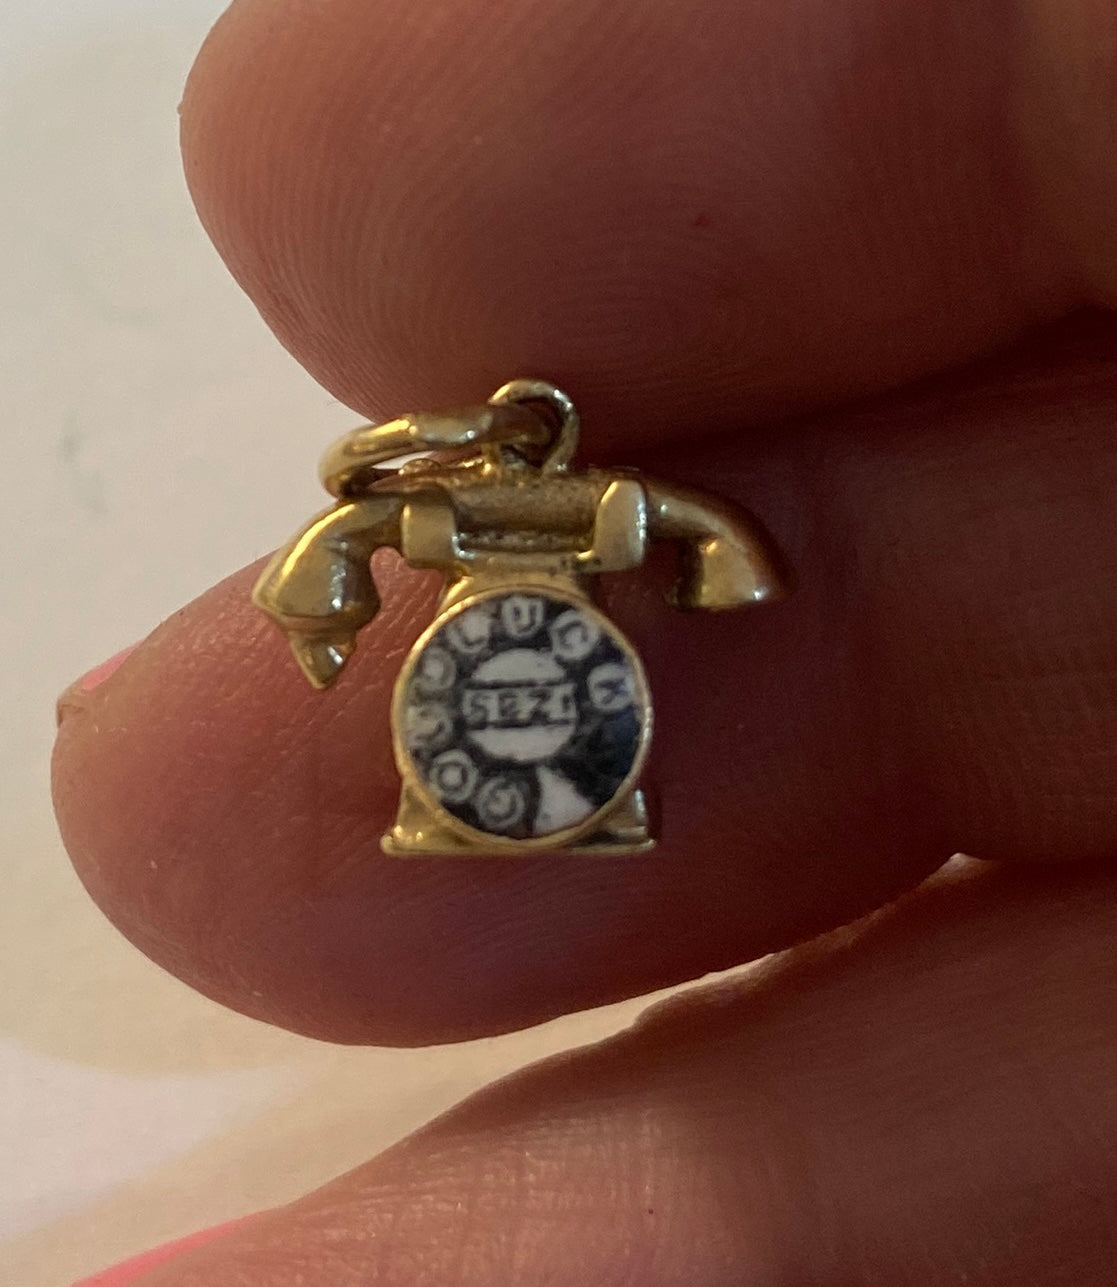 9ct vintage phone charm with 'good luck' on the dial circa 1963